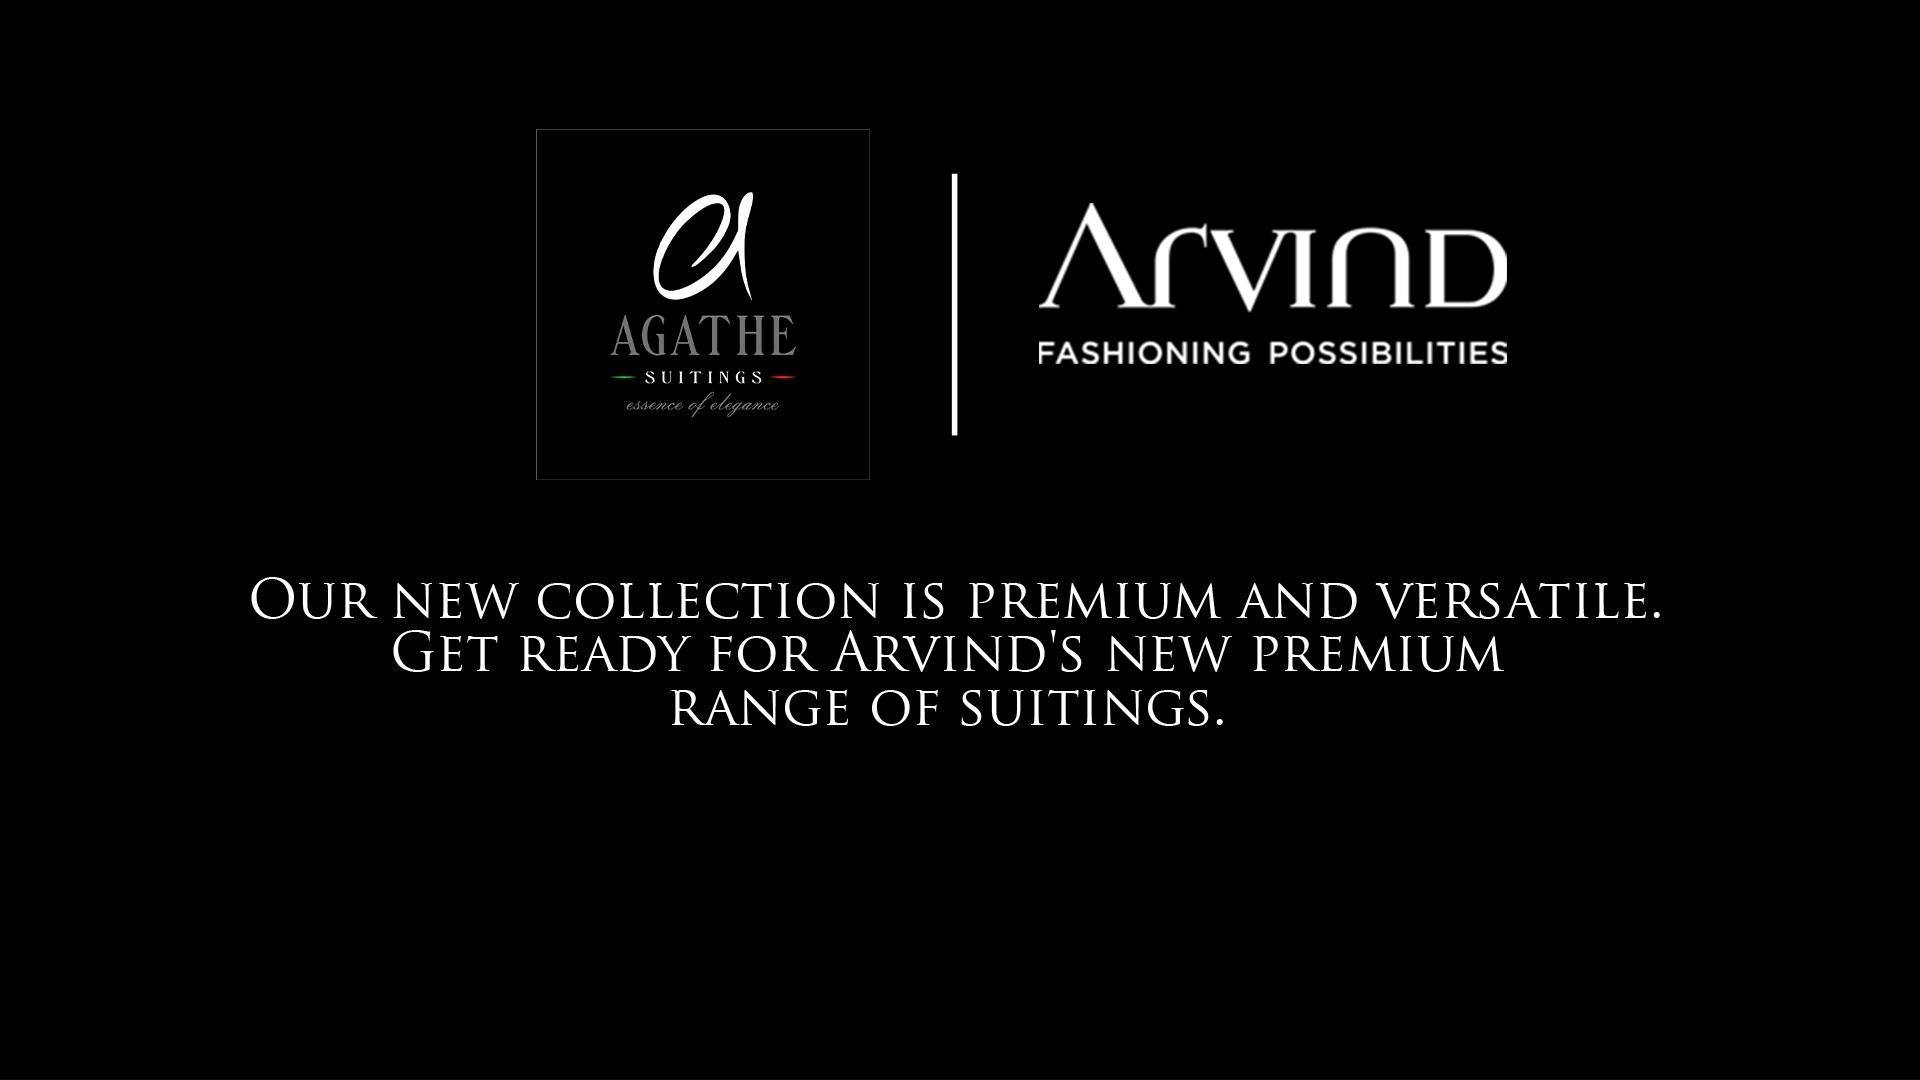 The new suiting language of Arvind. A collection of subtle and elegant designs, custom-made to suit fast-fashion, get ready for Agathe.
.
.
.
#ADfashion #ArvindFashion #TheArvindStore #Agathe #suitingcollection #ArvindFashioningPossibilities #formals #Menswear #MensFashion #Fashion #style #comfortable #classicmenswear #texturedfabrics #firstimpressions #StayStylish